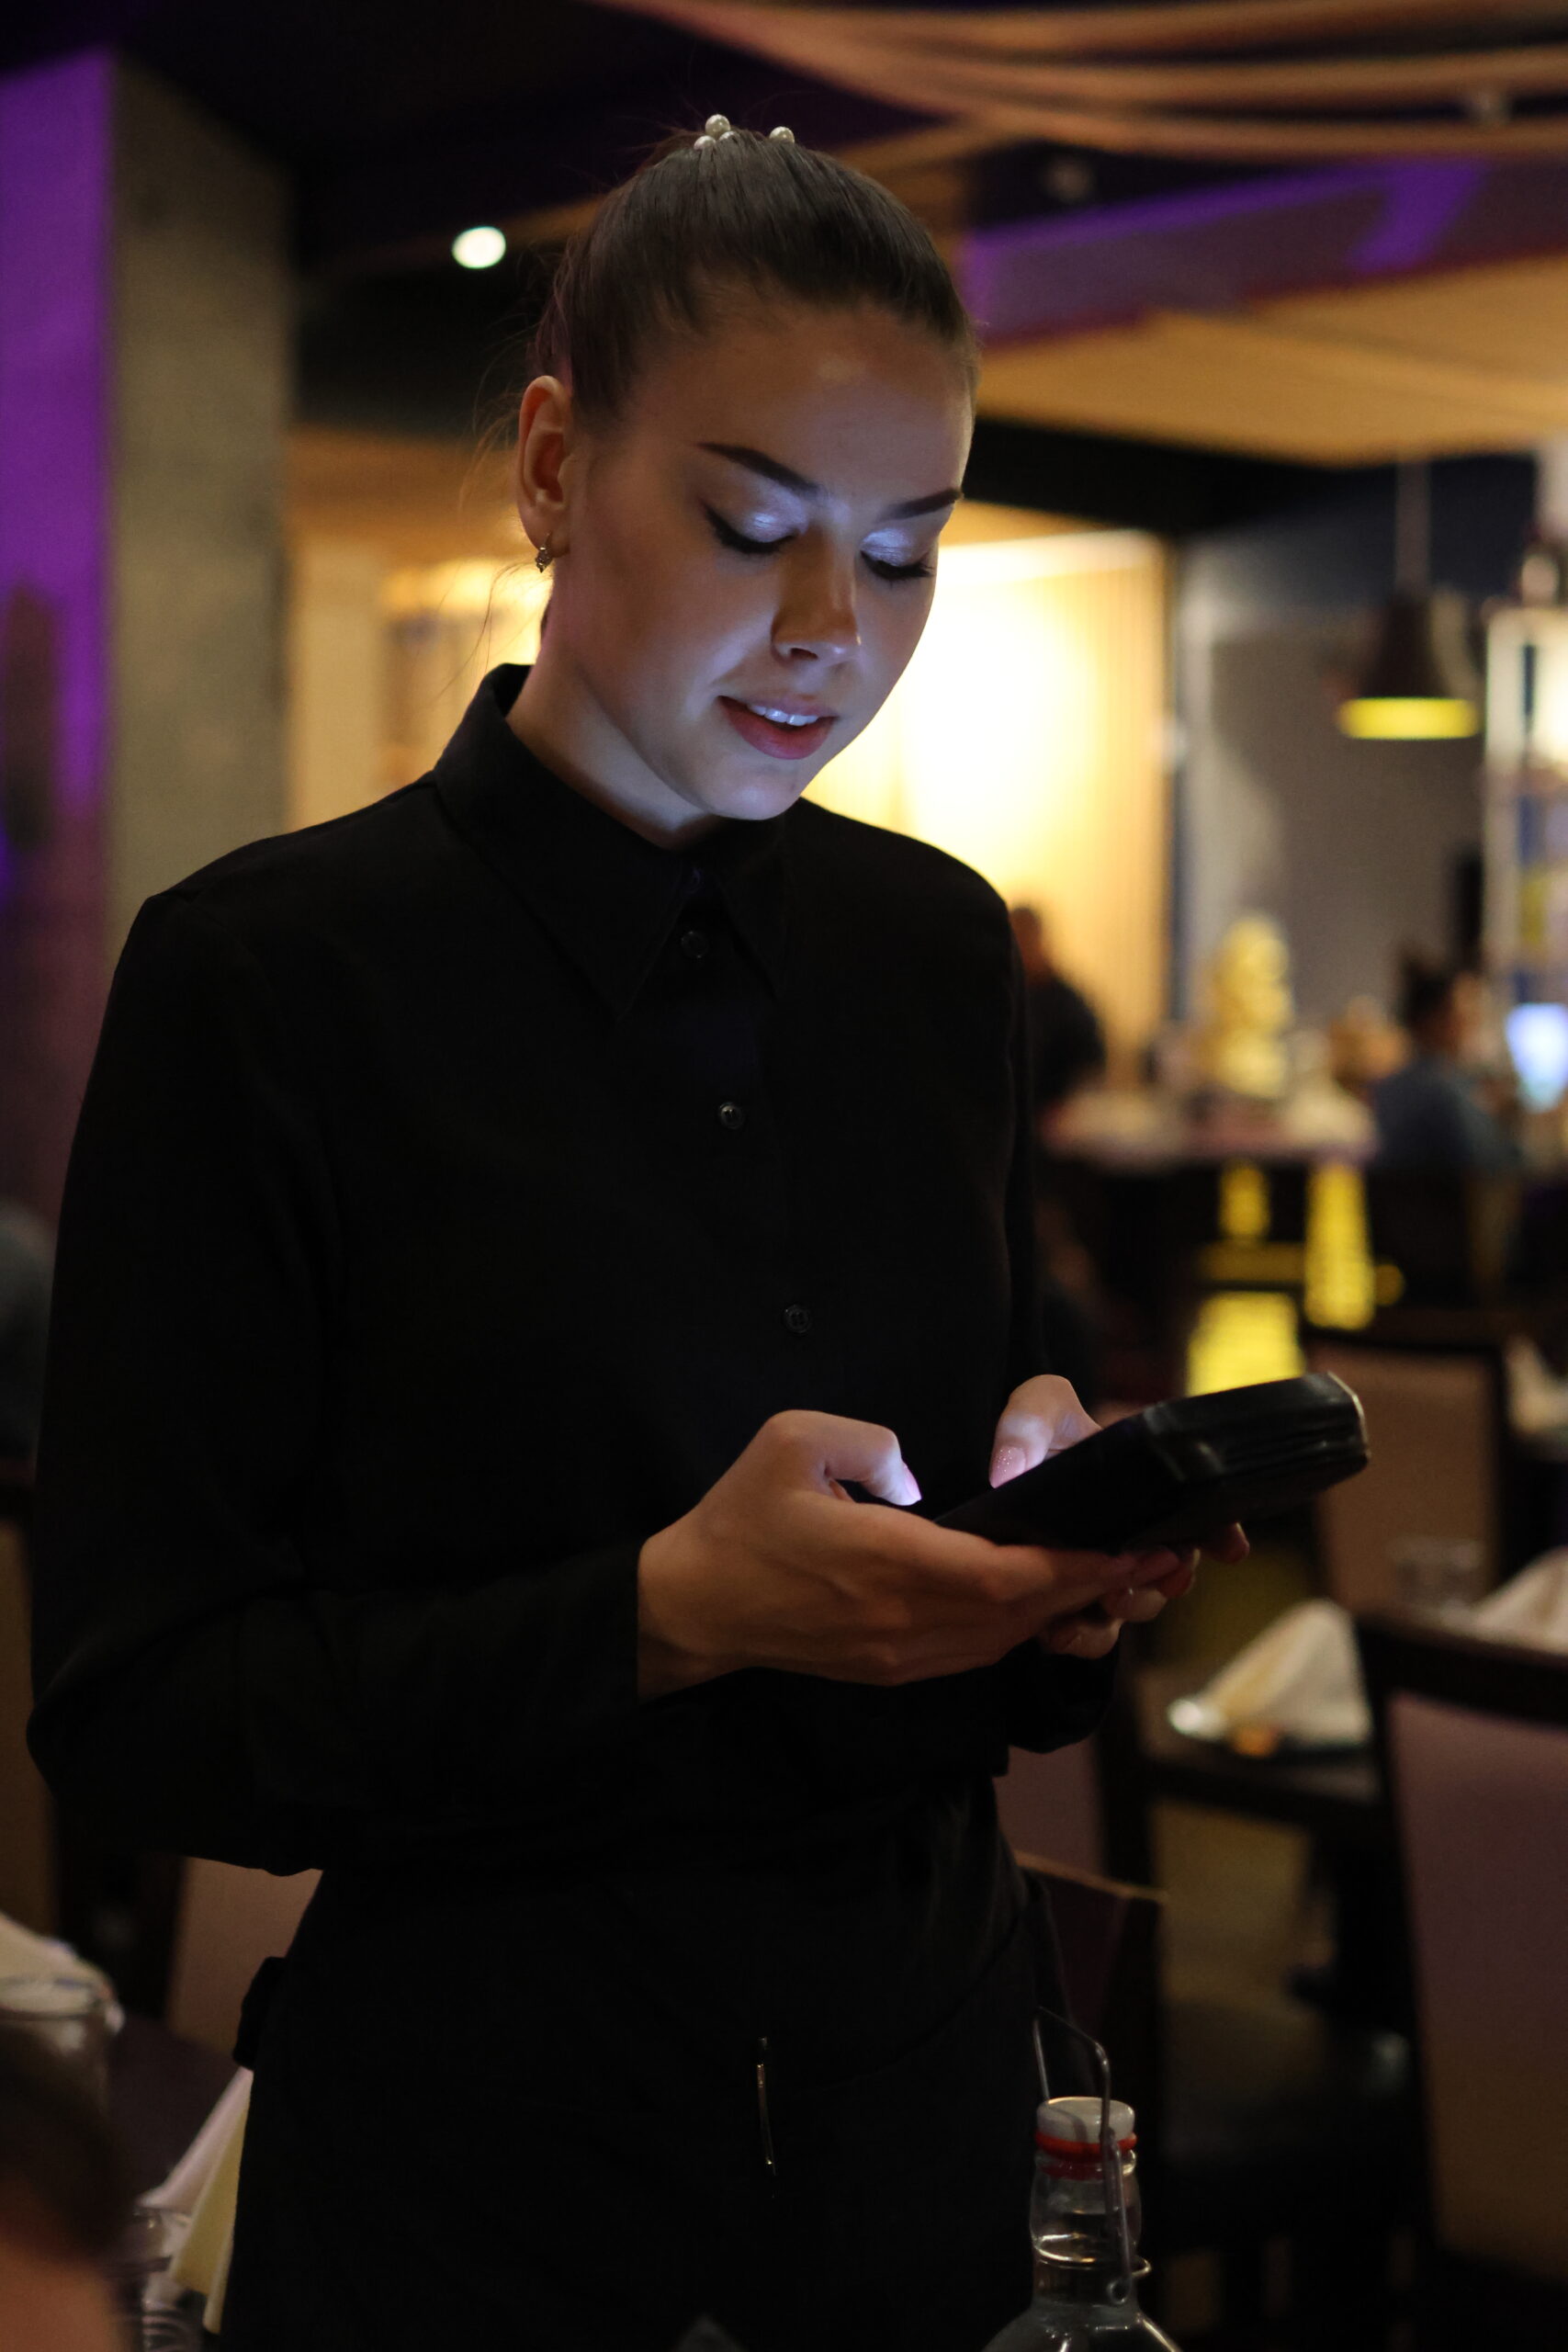 Waitress taking order with handheld device in restaurant